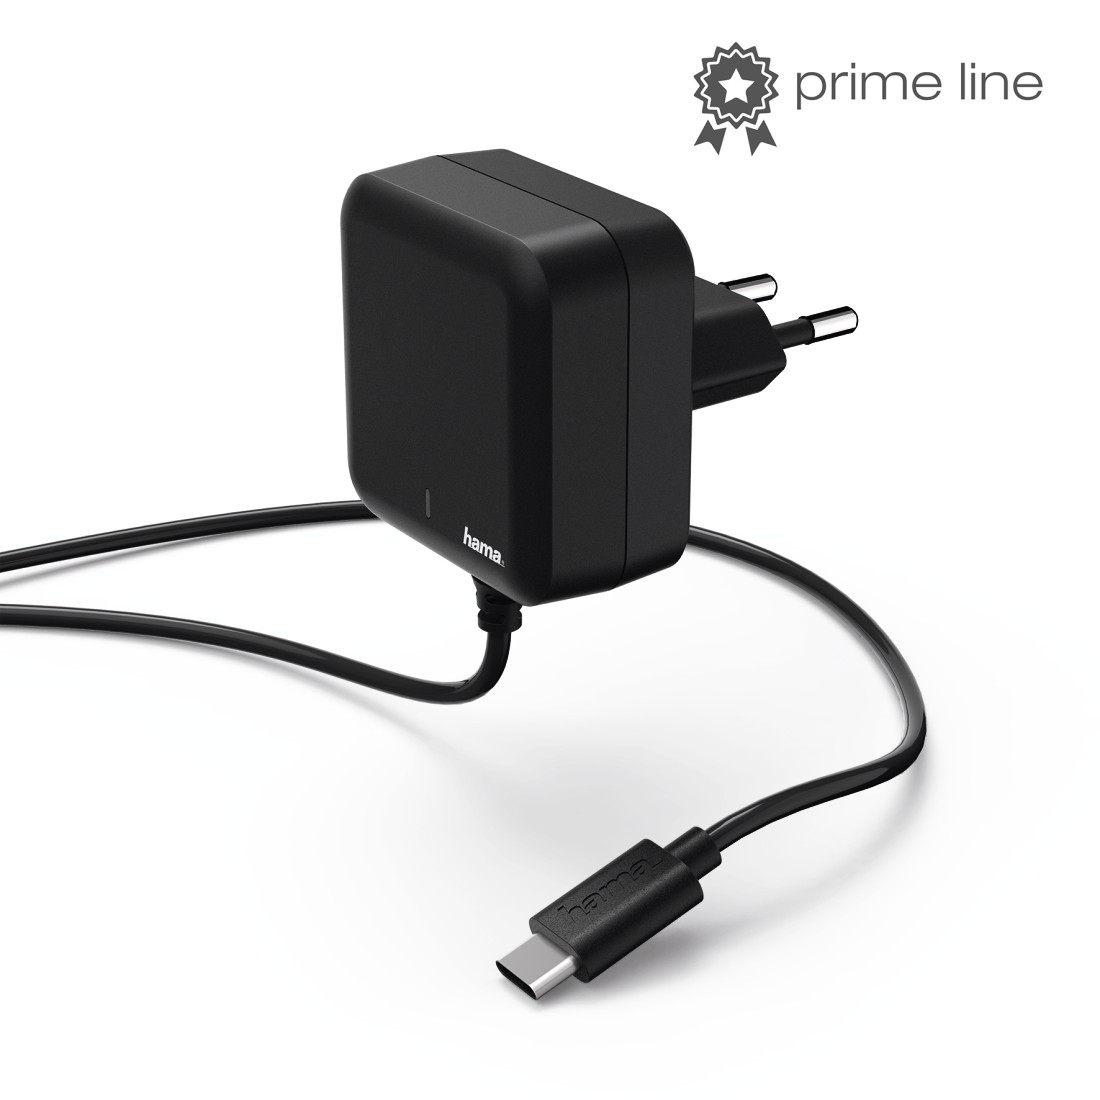 Hama Charger, USB Type-C, power delivery (PD), 3A, black